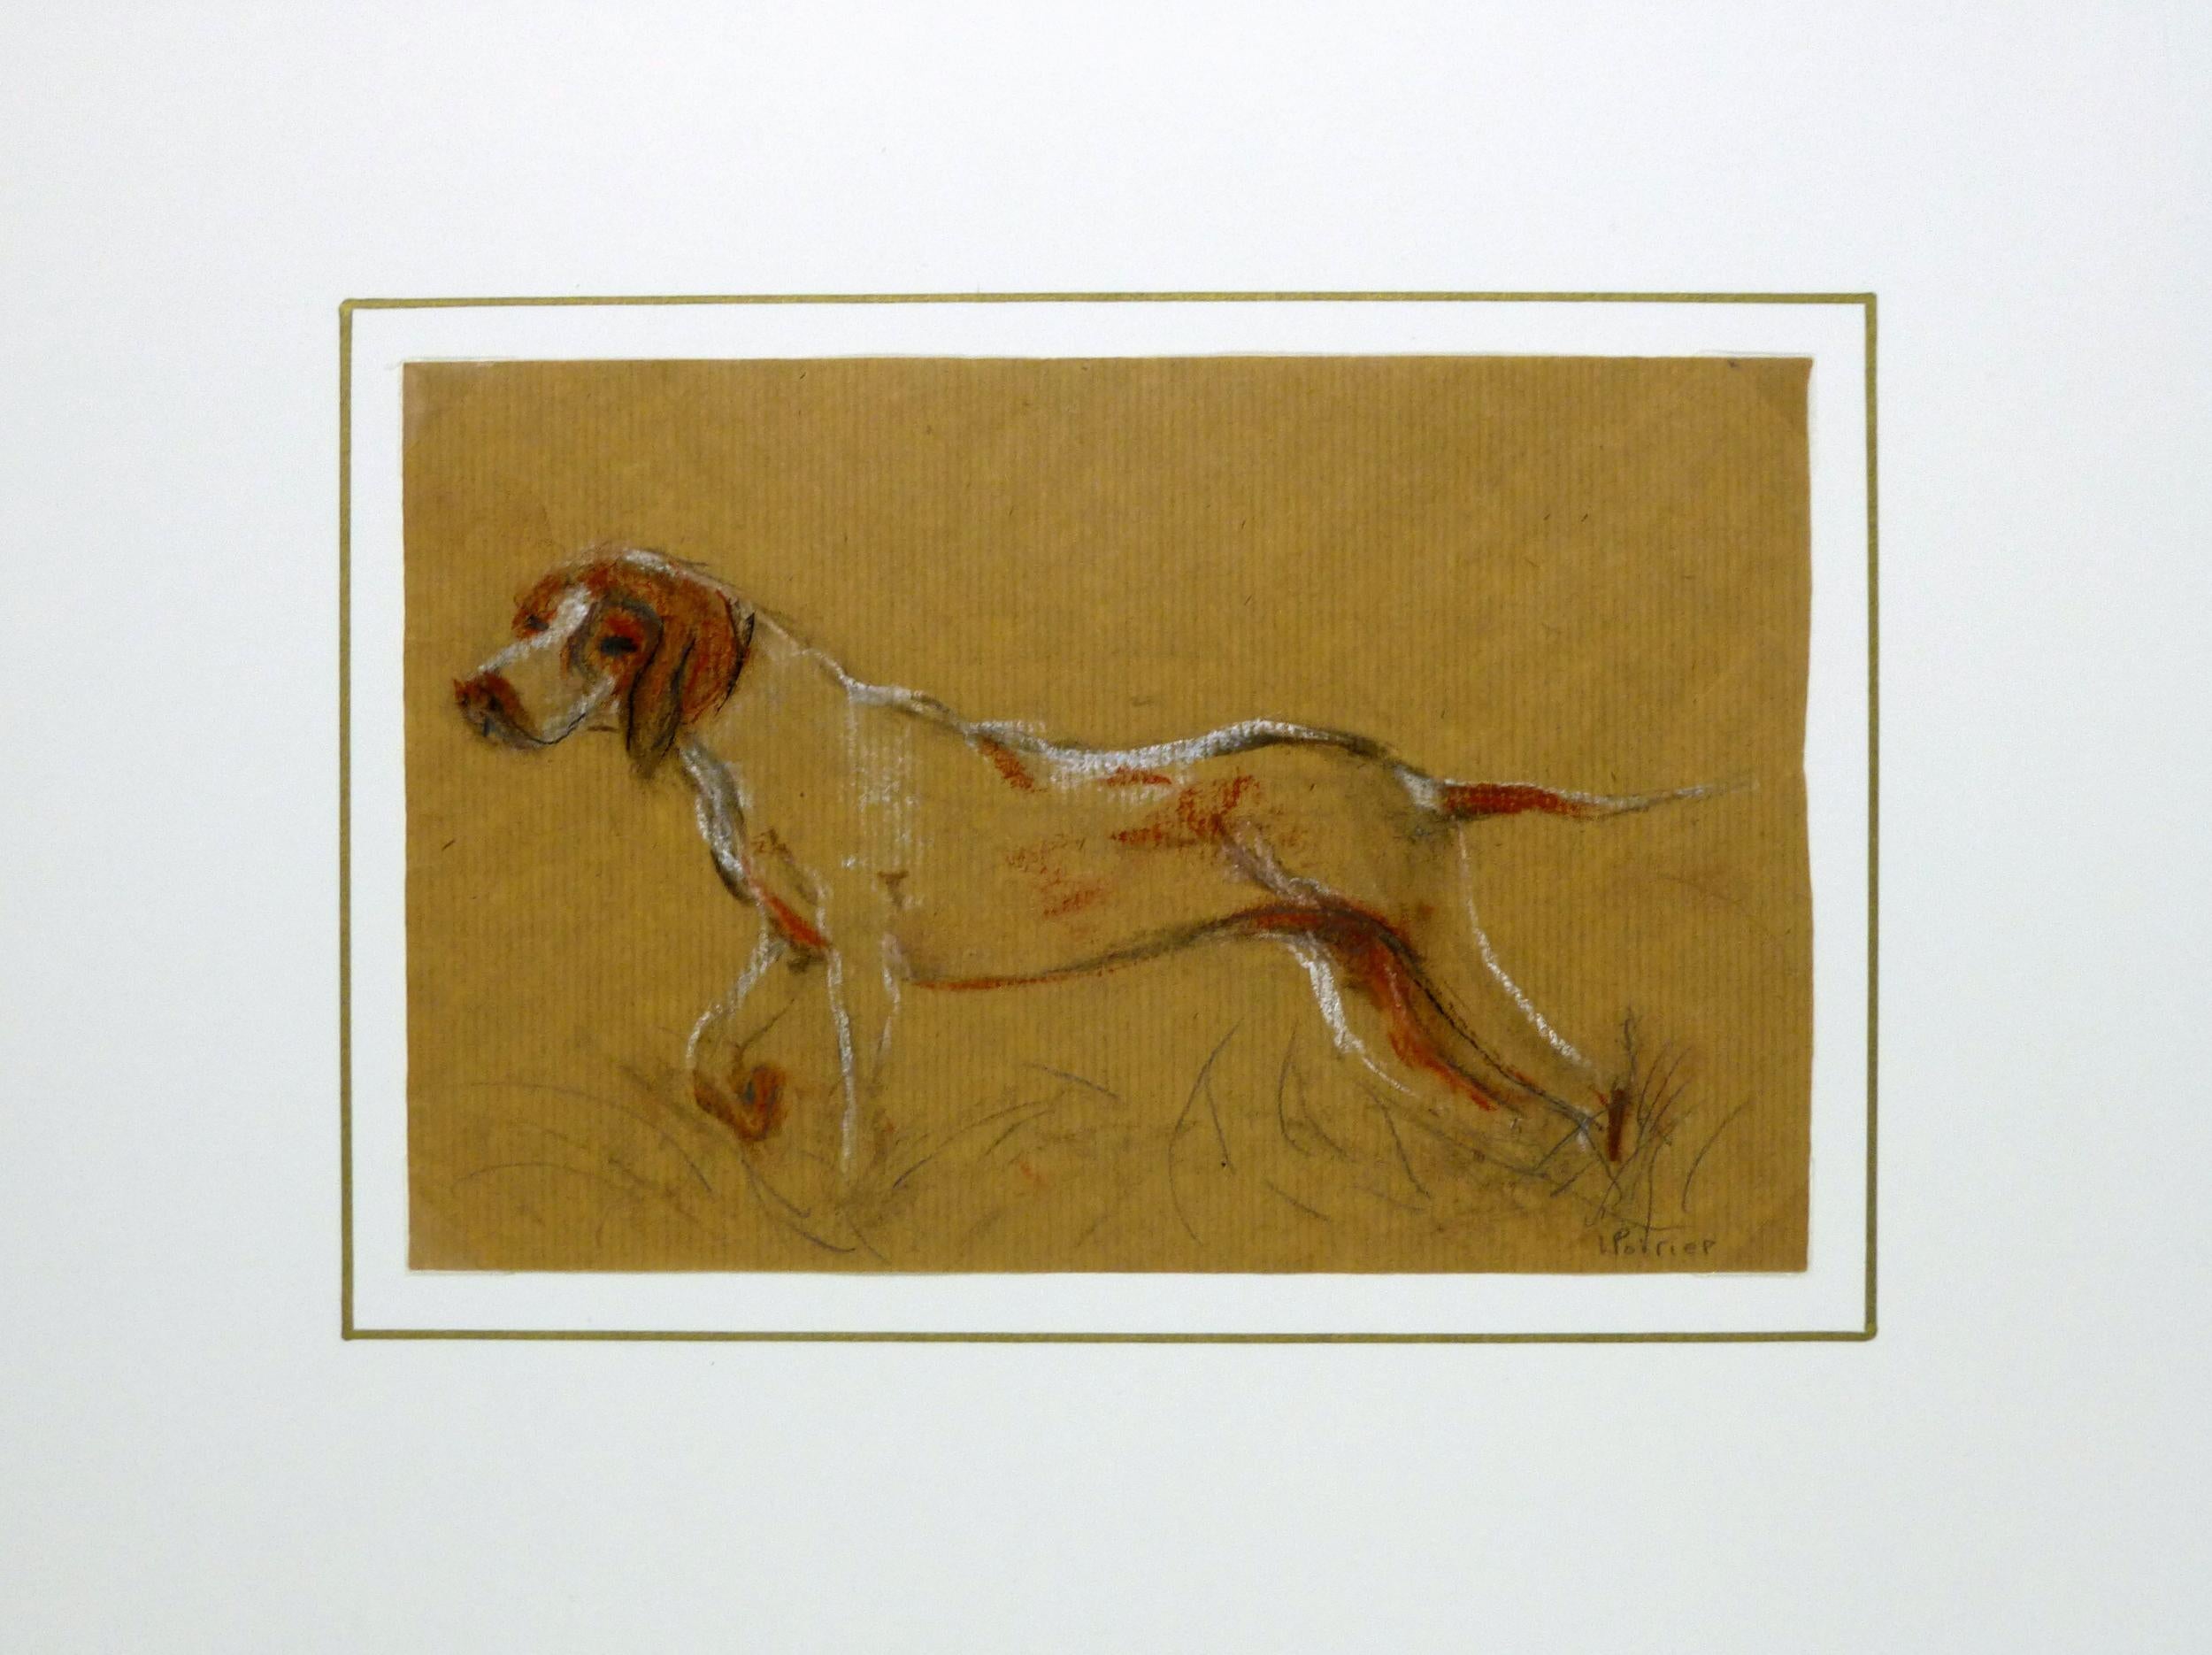 Expressive drawing of a beagle - in pointing stance mid-hunt - in pencil and chalk by French artist Louisette Poirier, signed lower right corner. 

Original artwork on paper displayed on a white mat with a gold border. Mat fits a standard-size